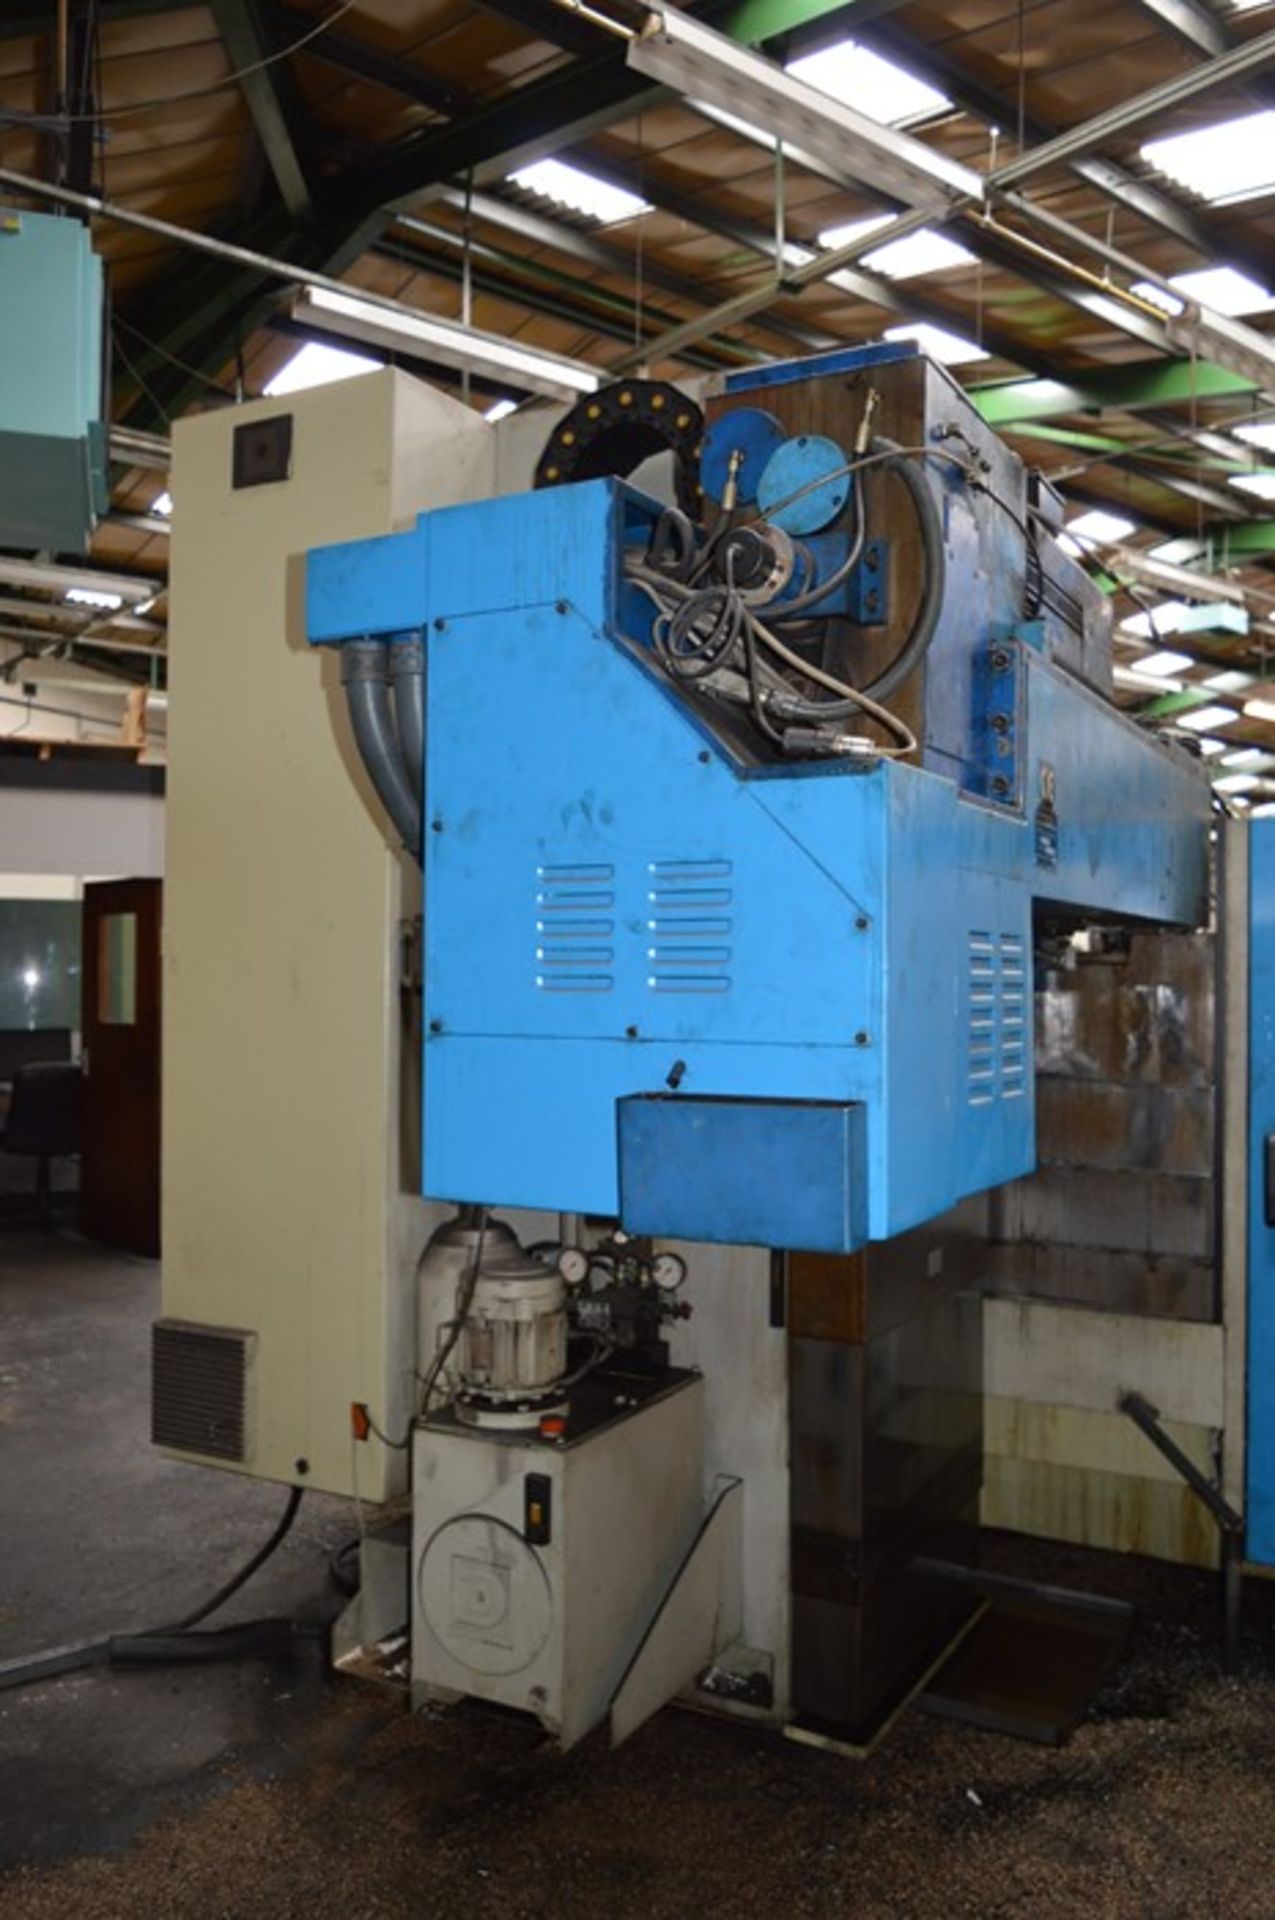 CME, BF-02 CNC bed type milling machine, Serial No. 02-132 (1996) with Heidehain CNC controls, - Image 3 of 9